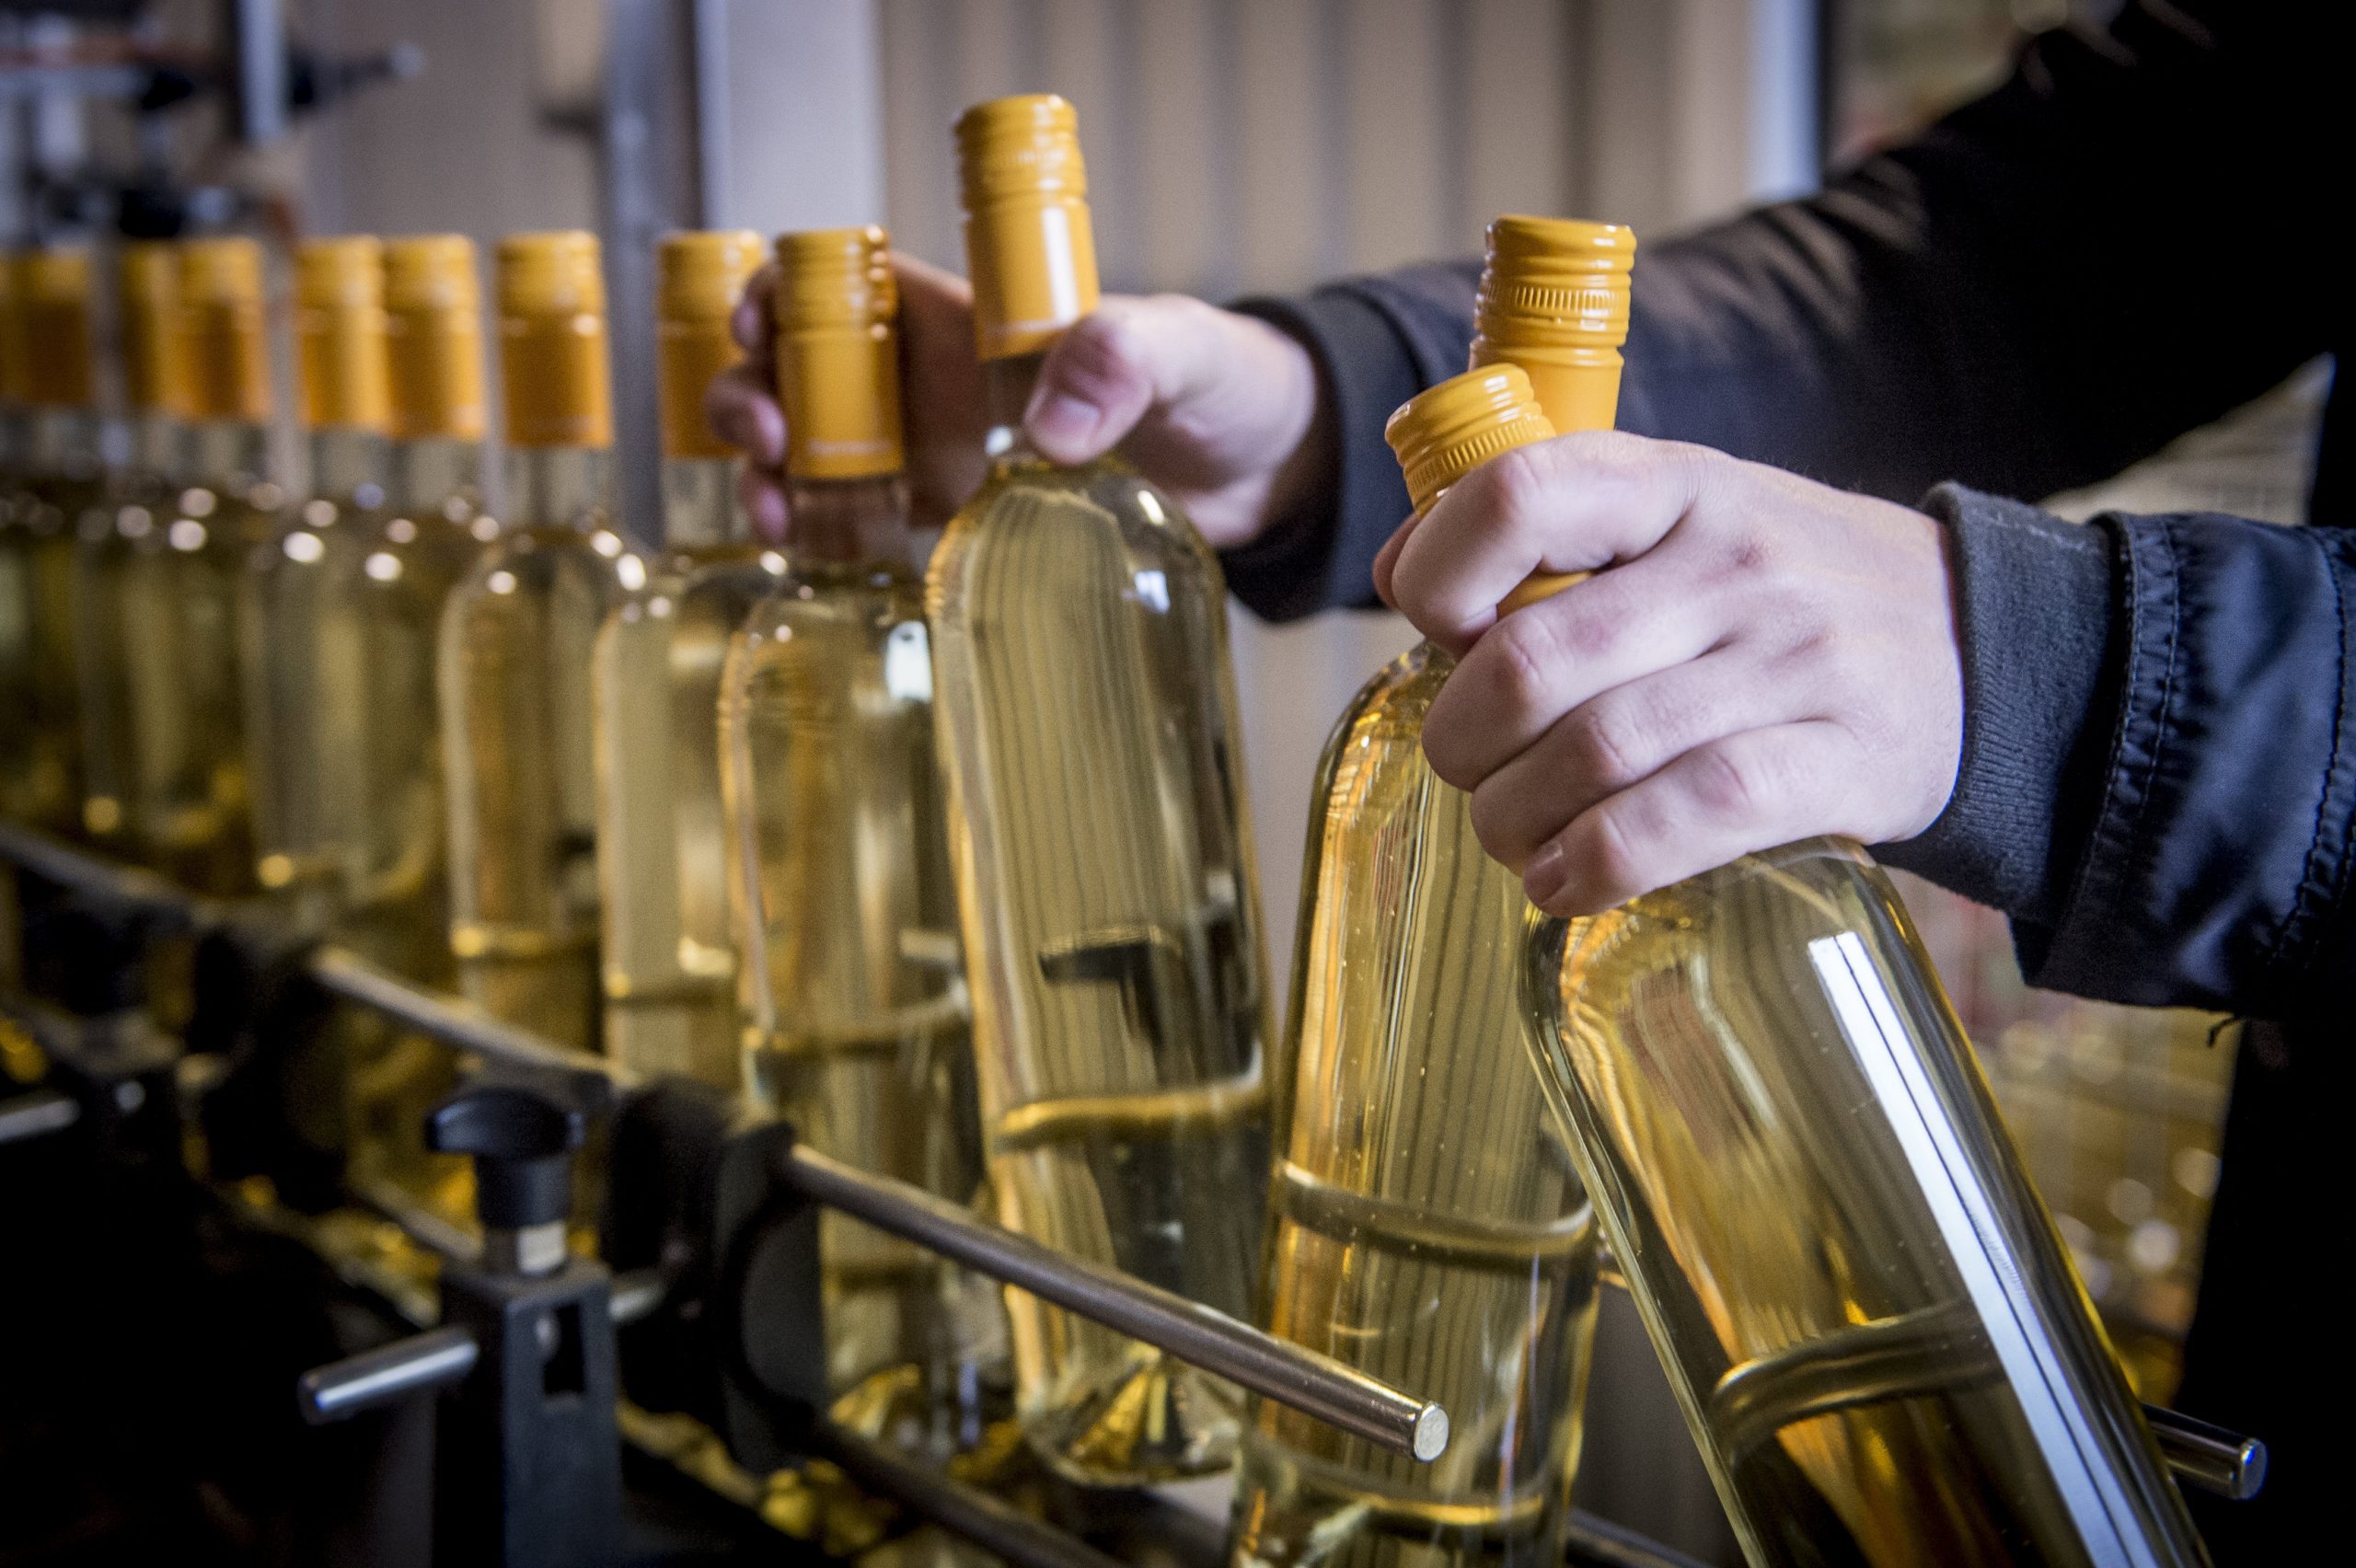 Hungarian Researchers Aim to Combat Wine Counterfeiting with New Method